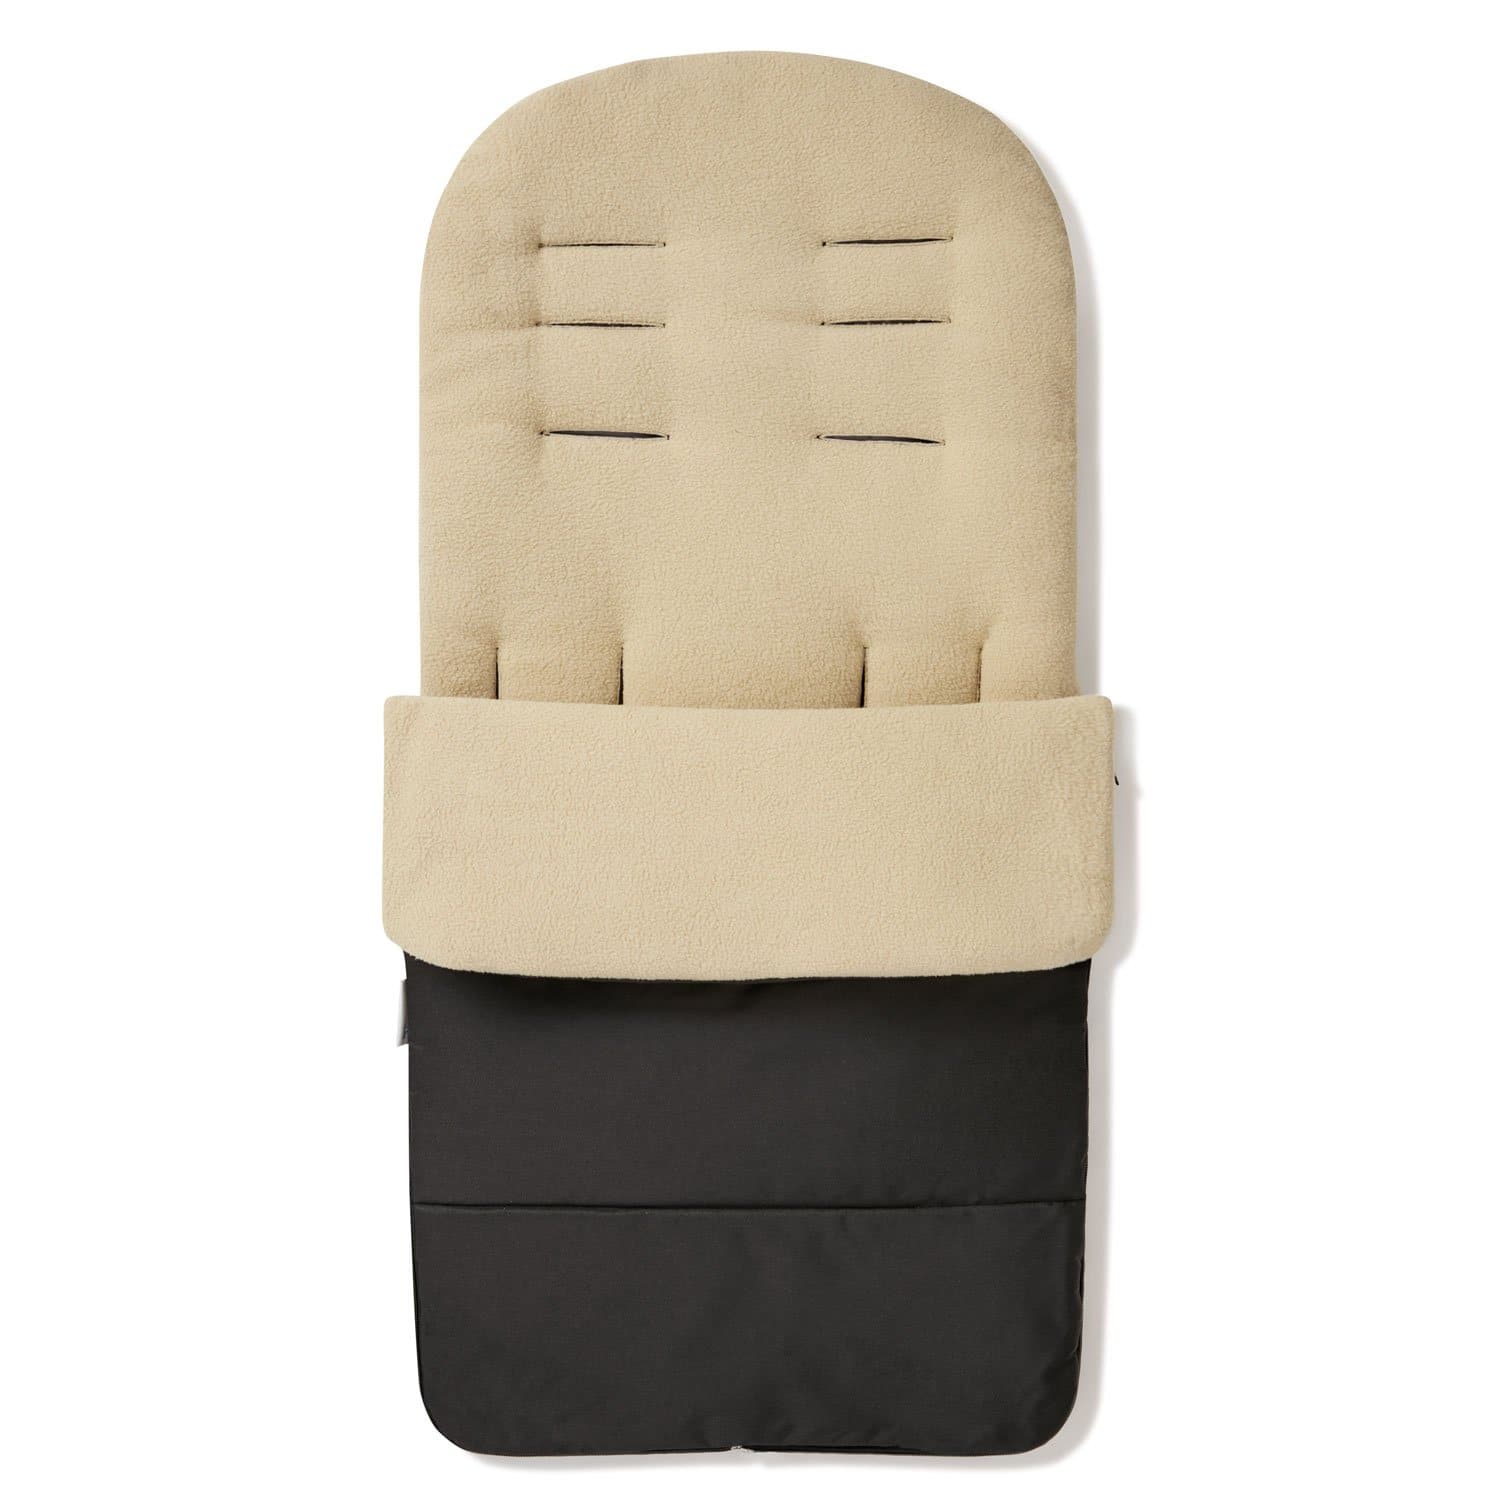 Premium Footmuff / Cosy Toes Compatible with Stokke - Desert Sand / Fits All Models | For Your Little One